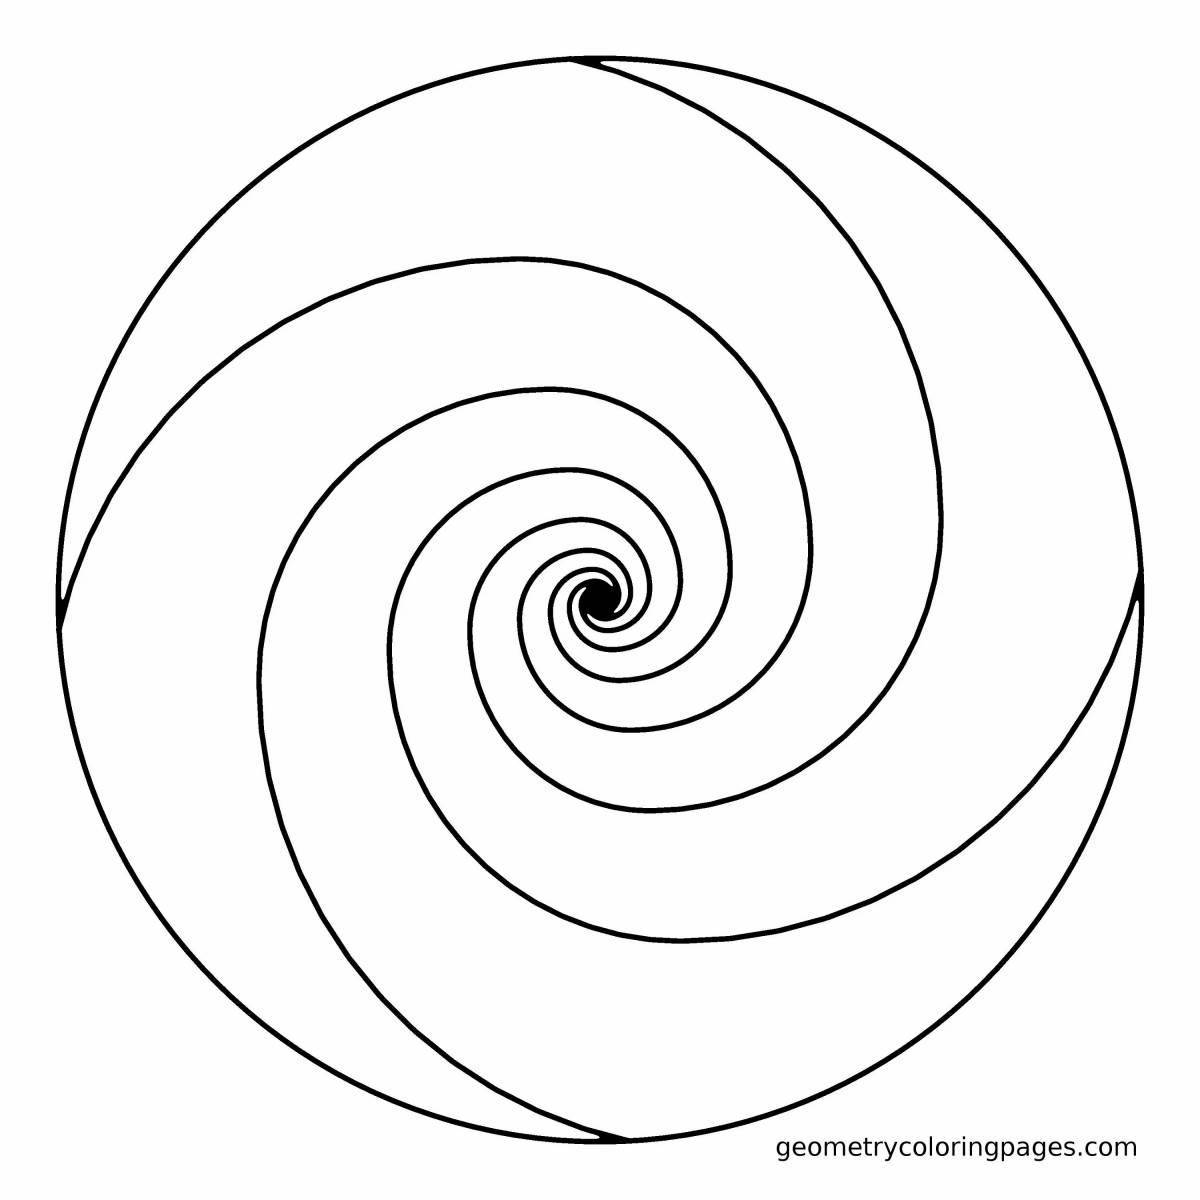 Coloring page with circle ornament